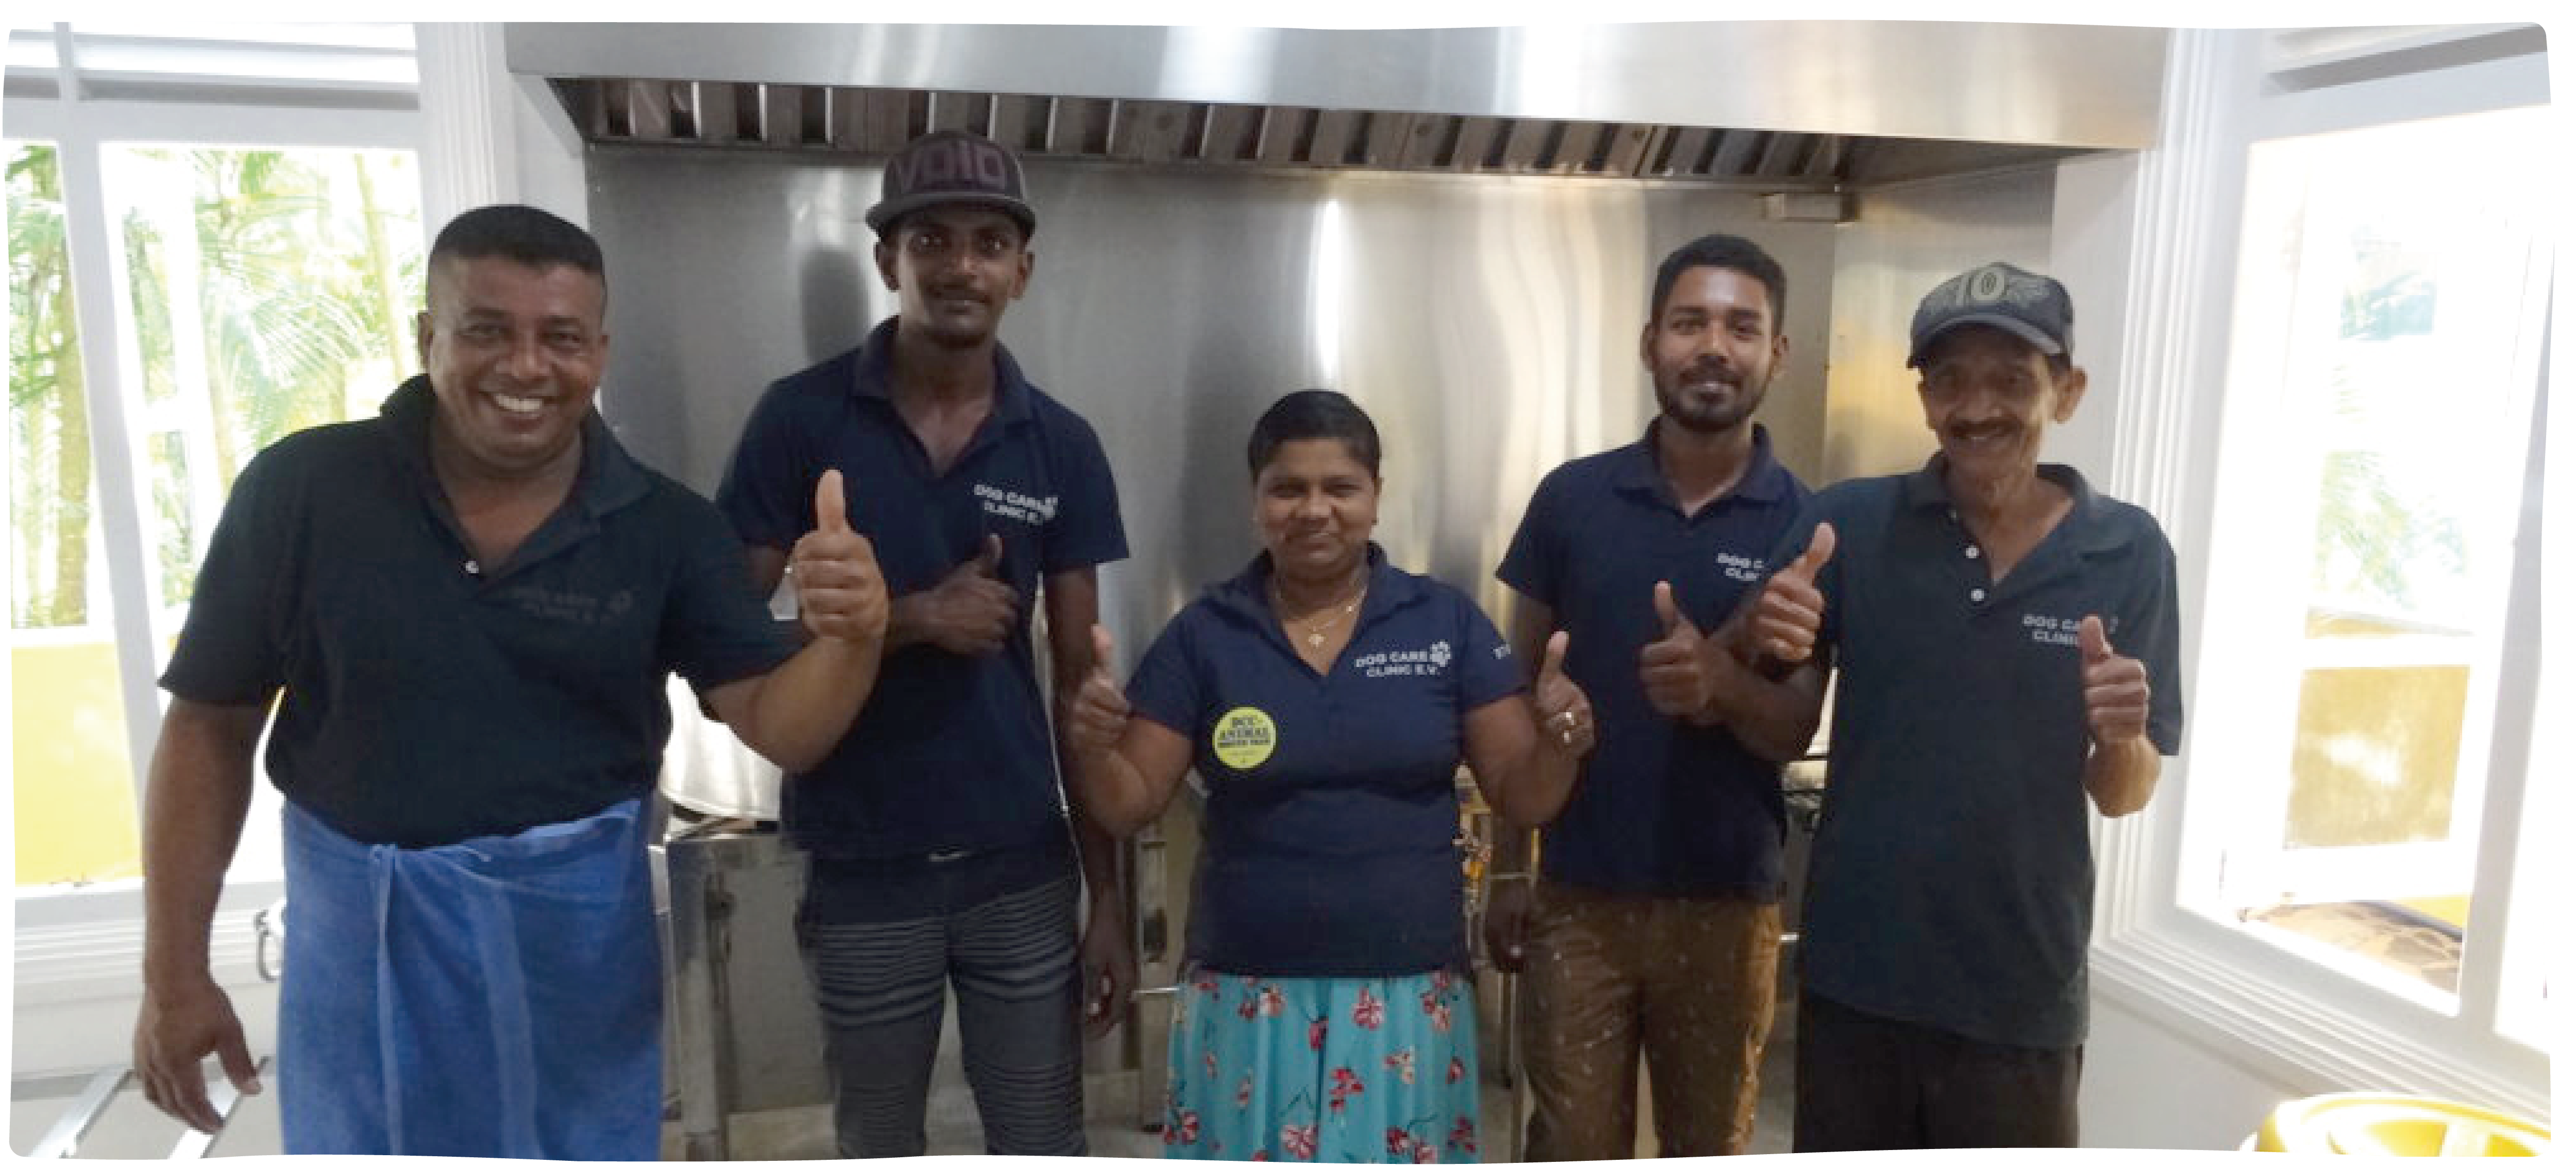 In 2018 we funded the build of a fully equipped kitchen, offering a much safer and more hygienic environment to prepare meals.